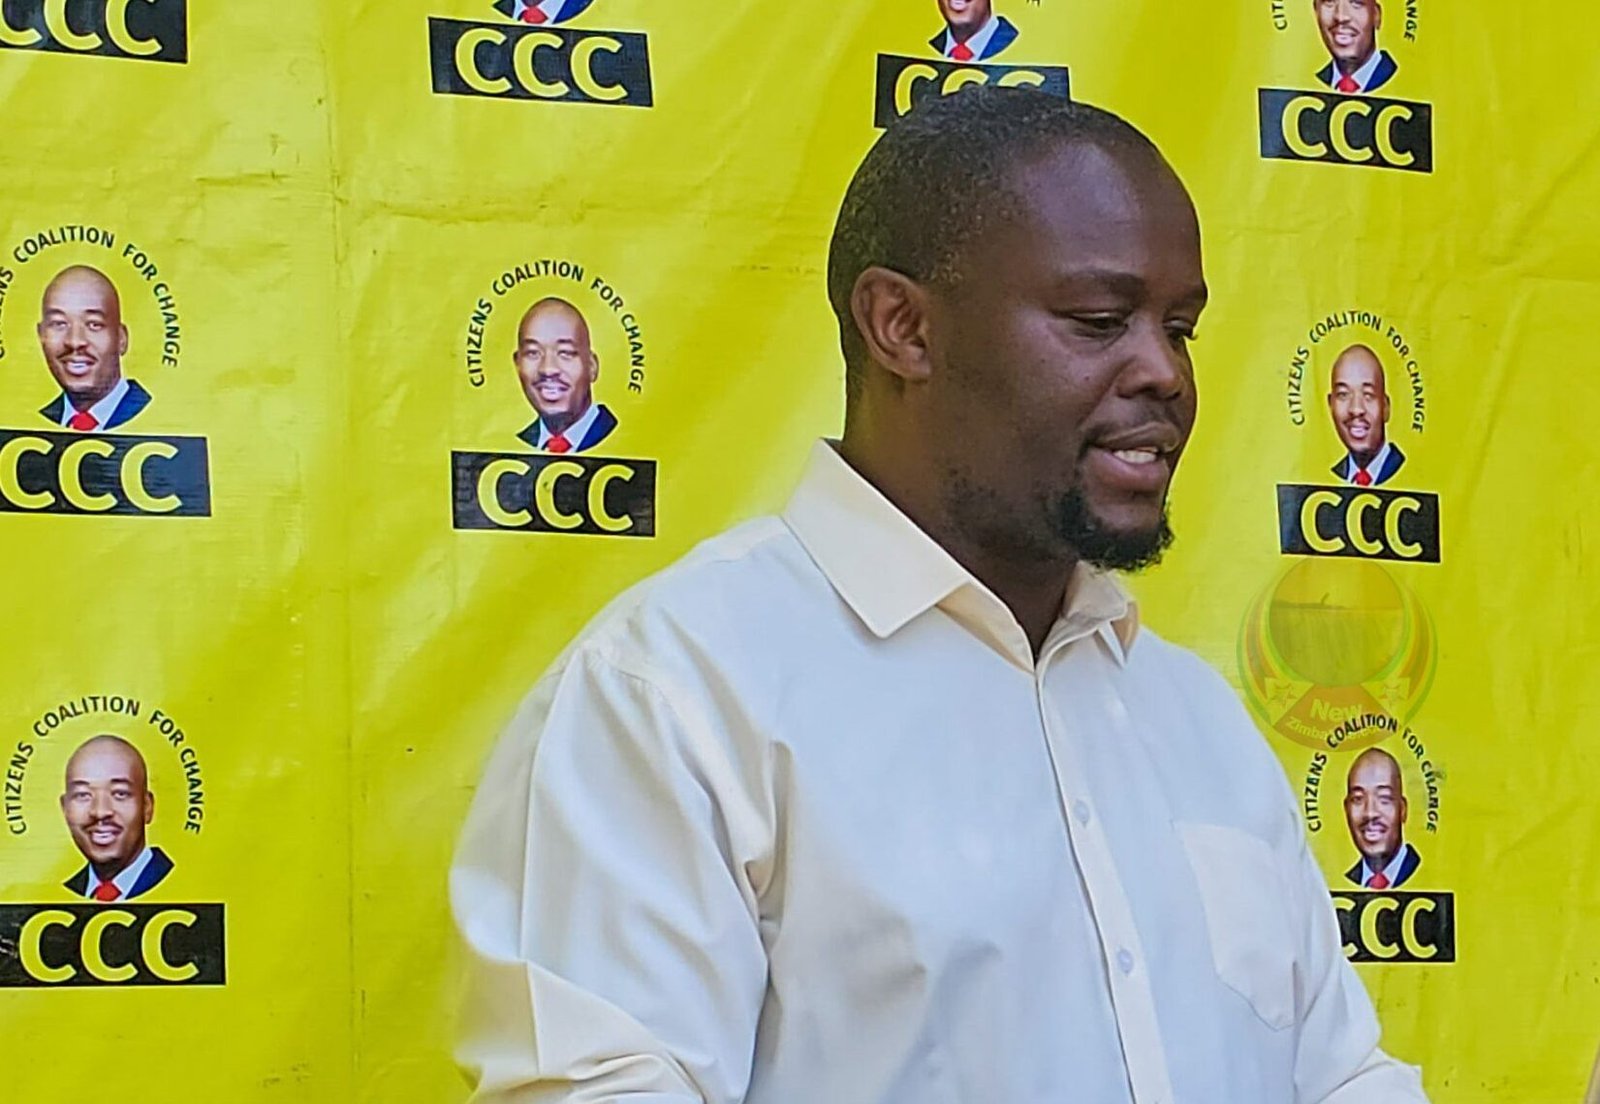 Turmoil Within CCC as Chamisa’s Faction Rejects New Leadership | Report Focus News